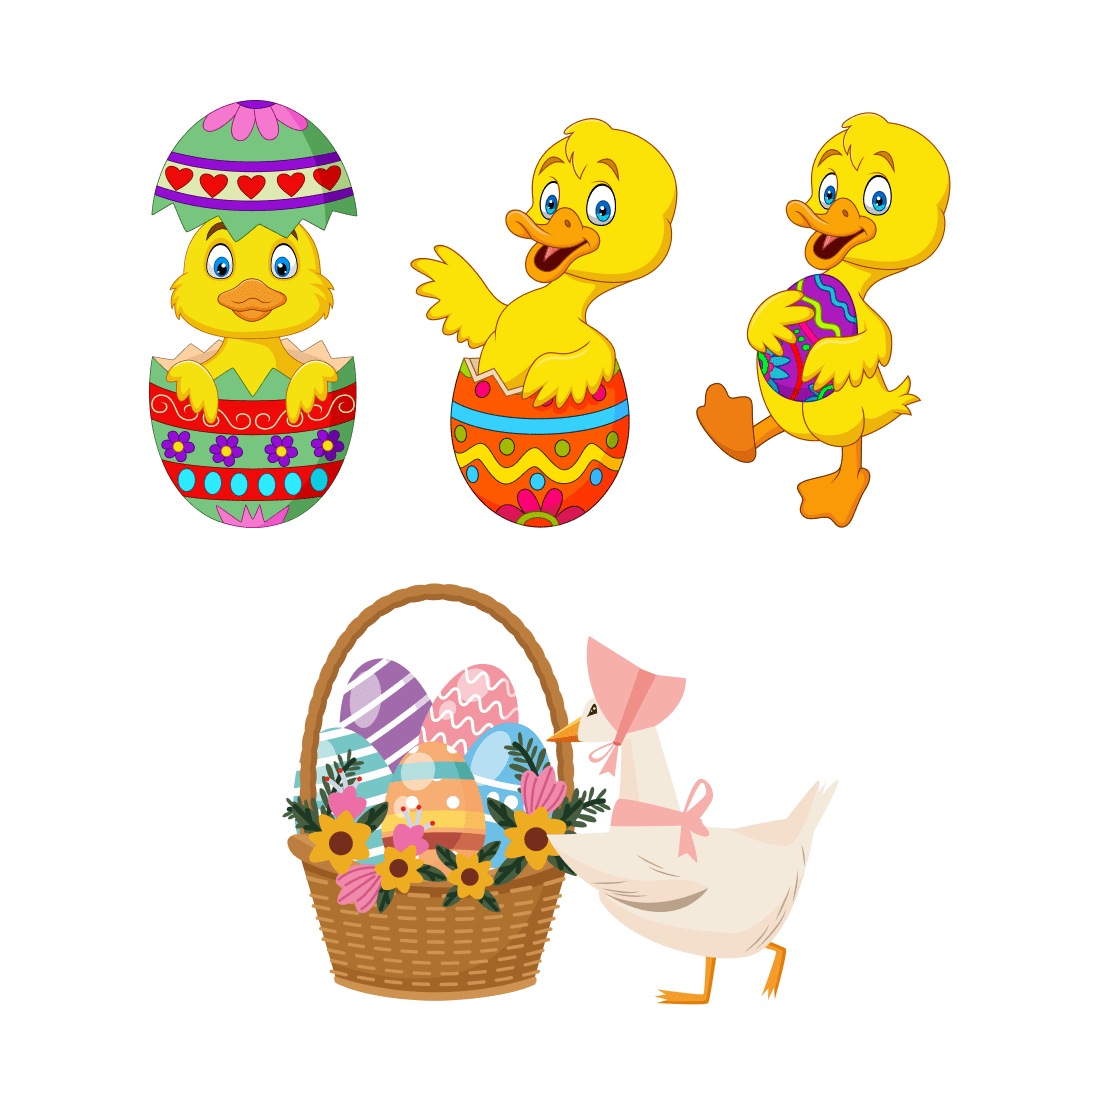 A collection of adorable images of Easter eggs and a duck.